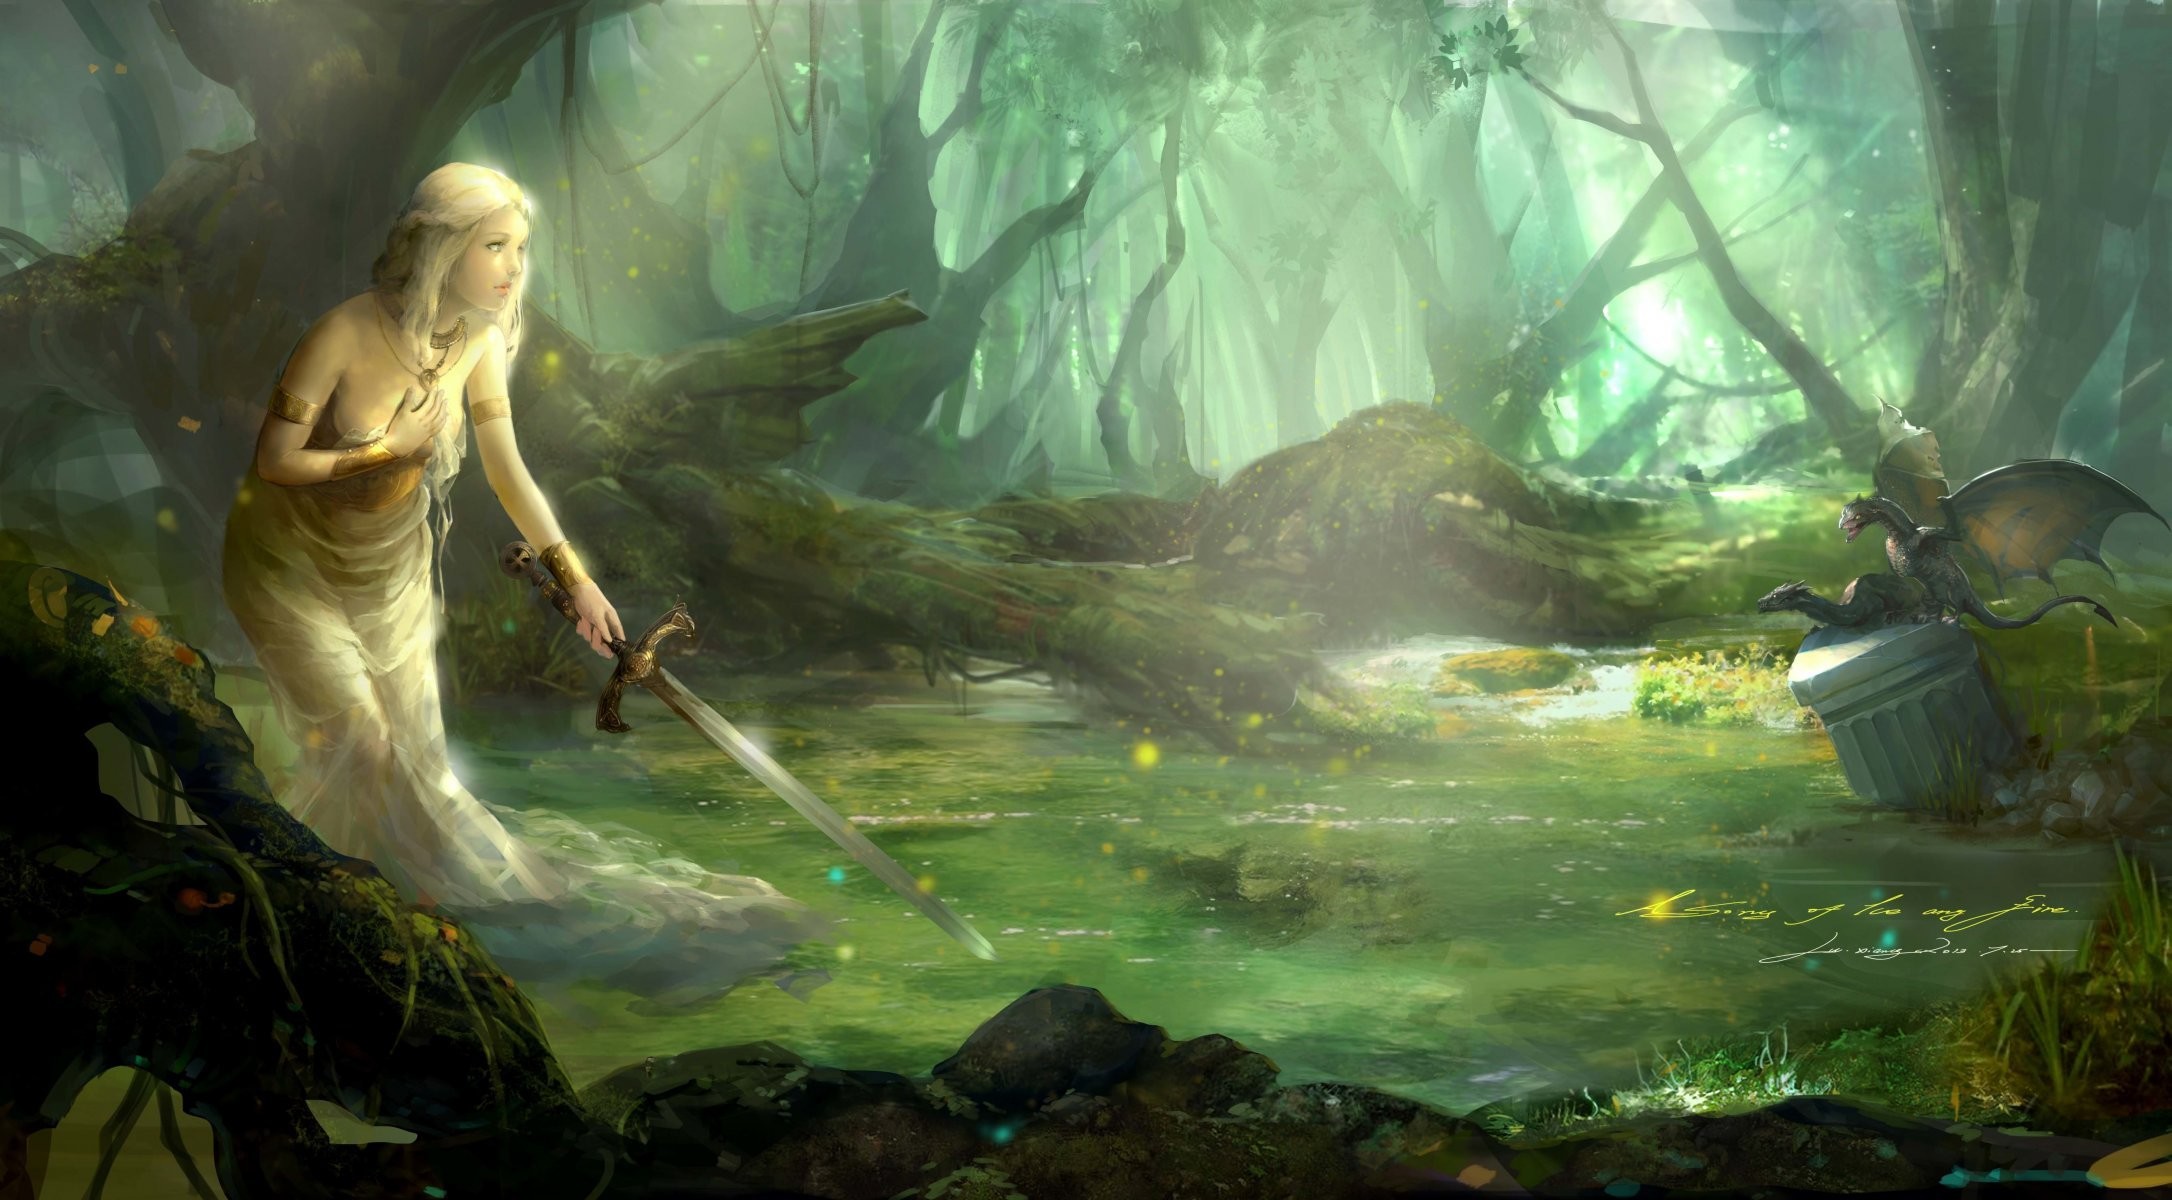 2172x1200 art xiangxiang lu a song of ice and fire girl sword dragons forest water